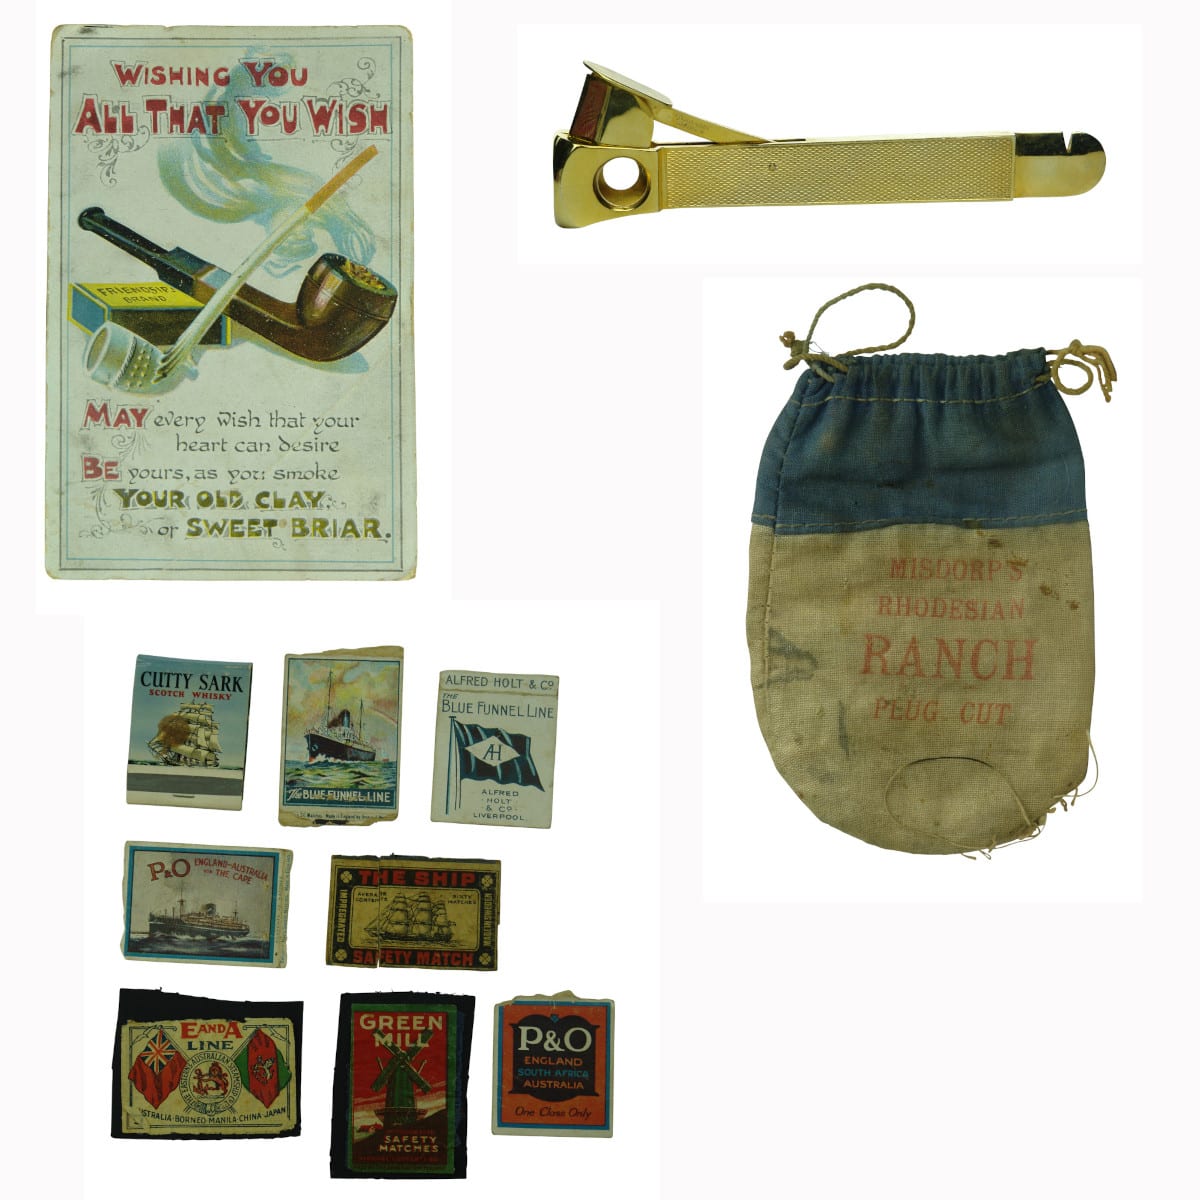 Tobacco related group of items: Post Card, Cigar Cutter, Match Box Labels and Tobacco Bag.